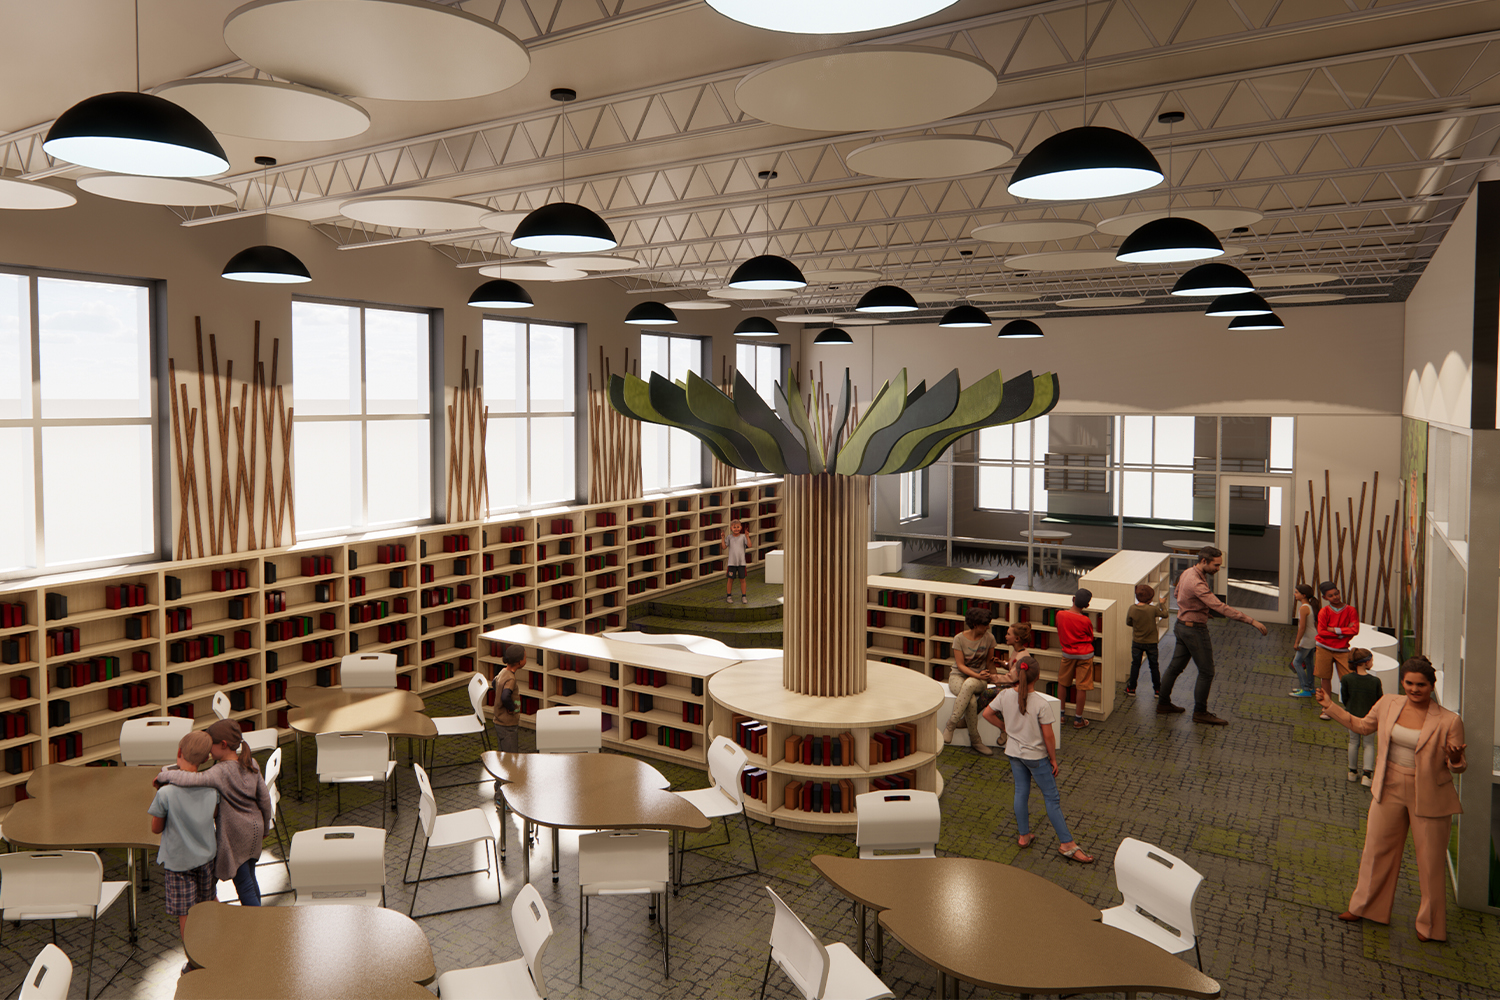 Rendering of the media center layout at Rutledge Pearson Elementary School